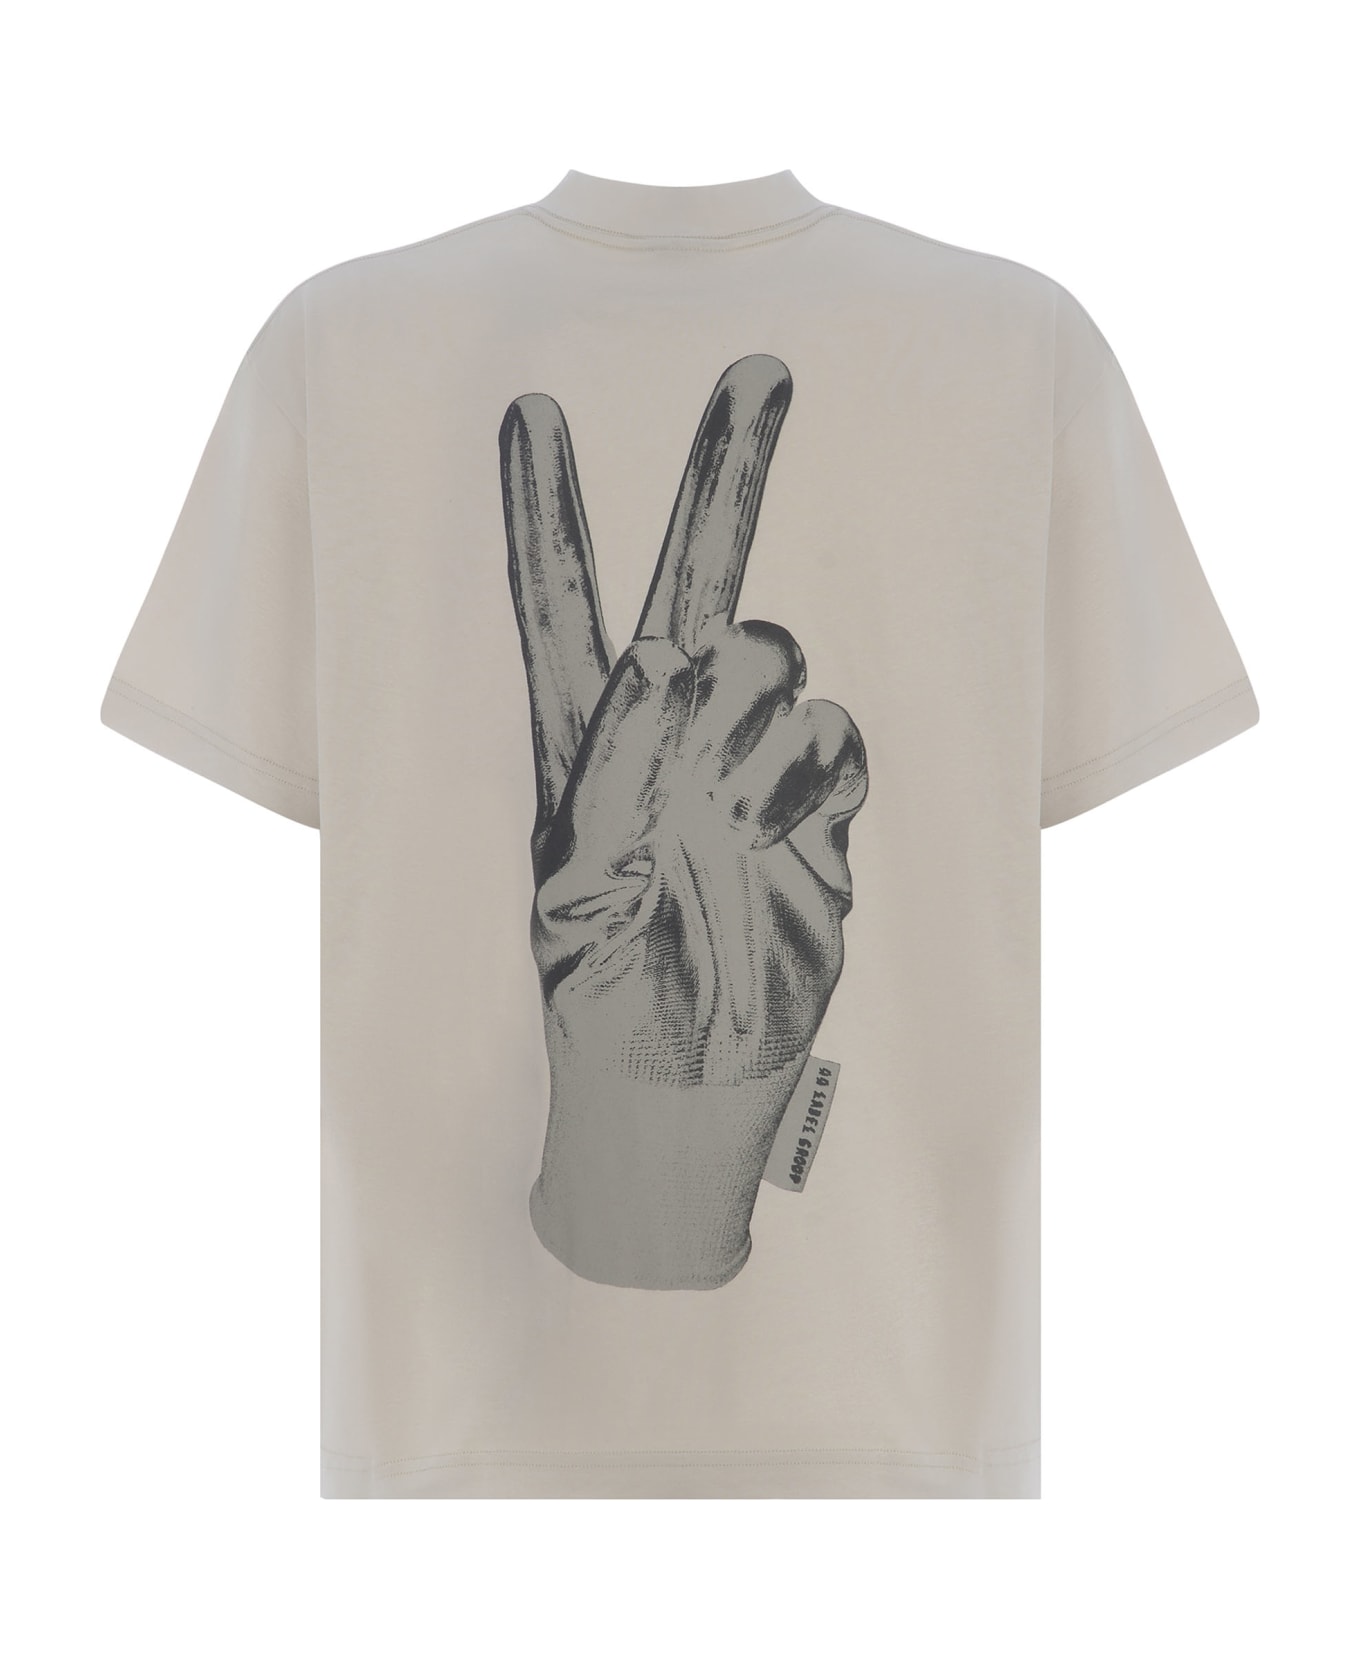 44 Label Group T-shirt 44 Label Group "peace" Made Of Cotton - Crema